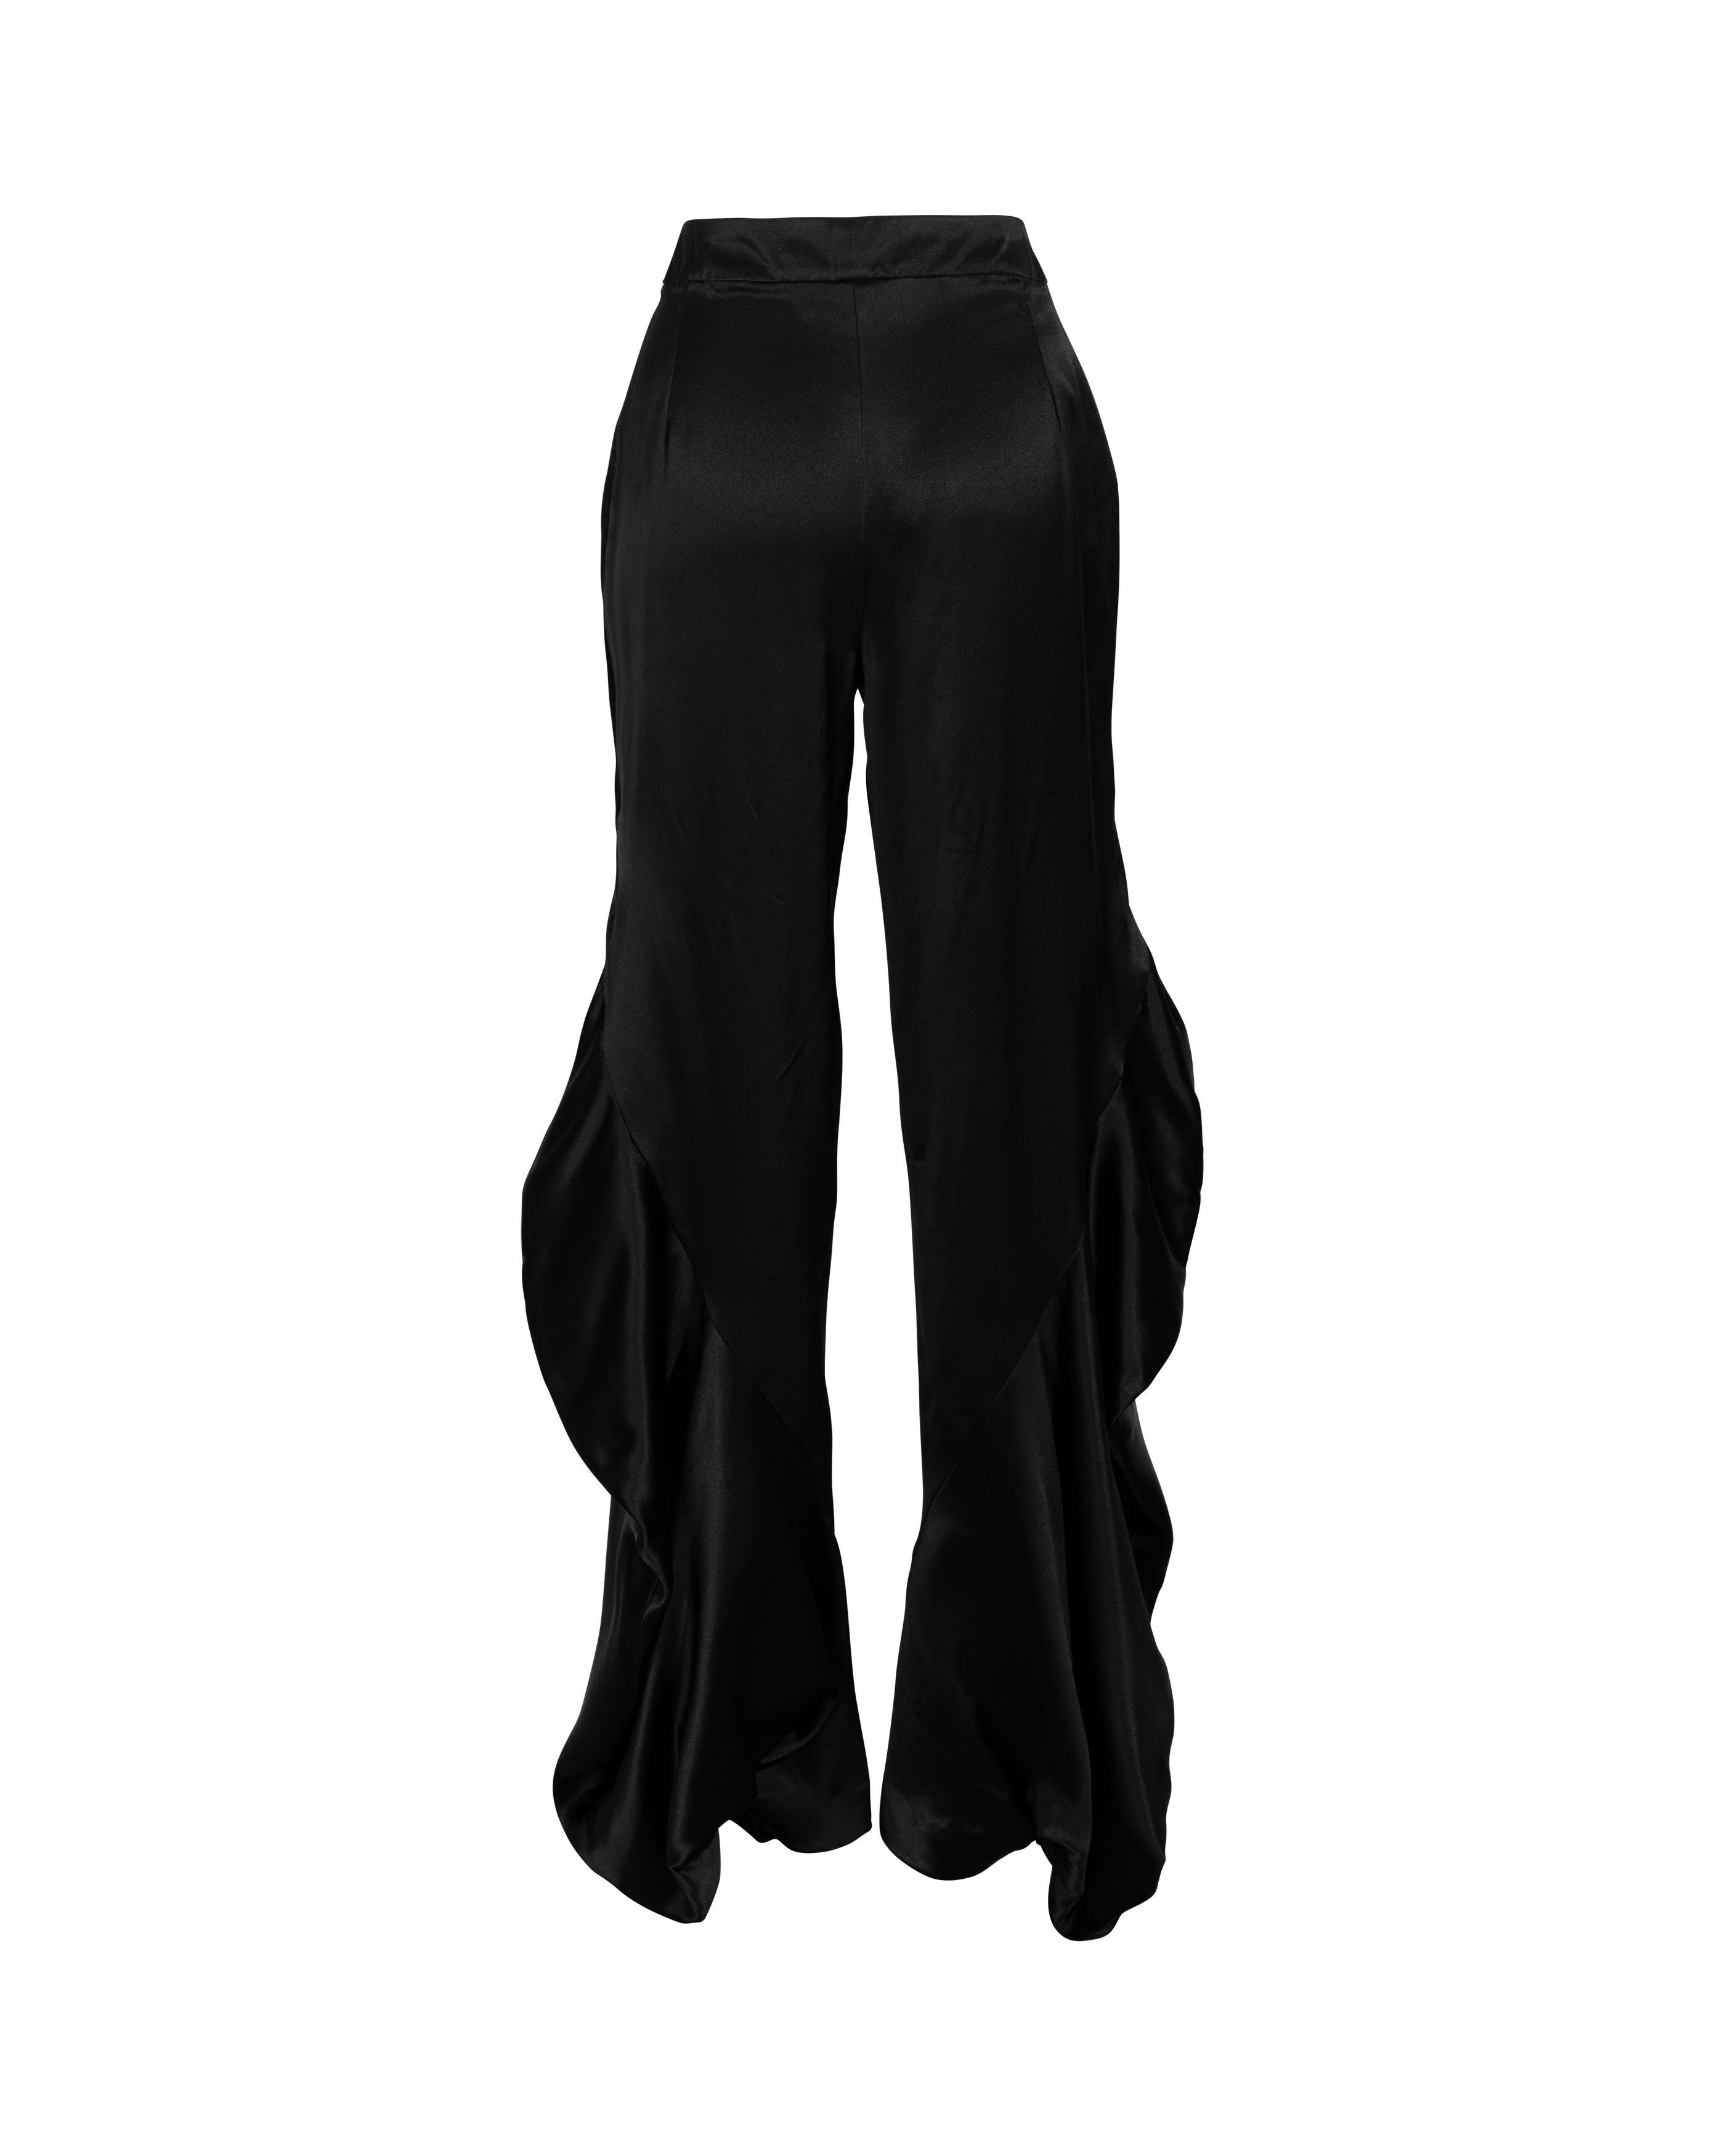 2000’s Christian Dior by John Galliano Silk Black Pants with Ruffle Sides In Excellent Condition In North Hollywood, CA